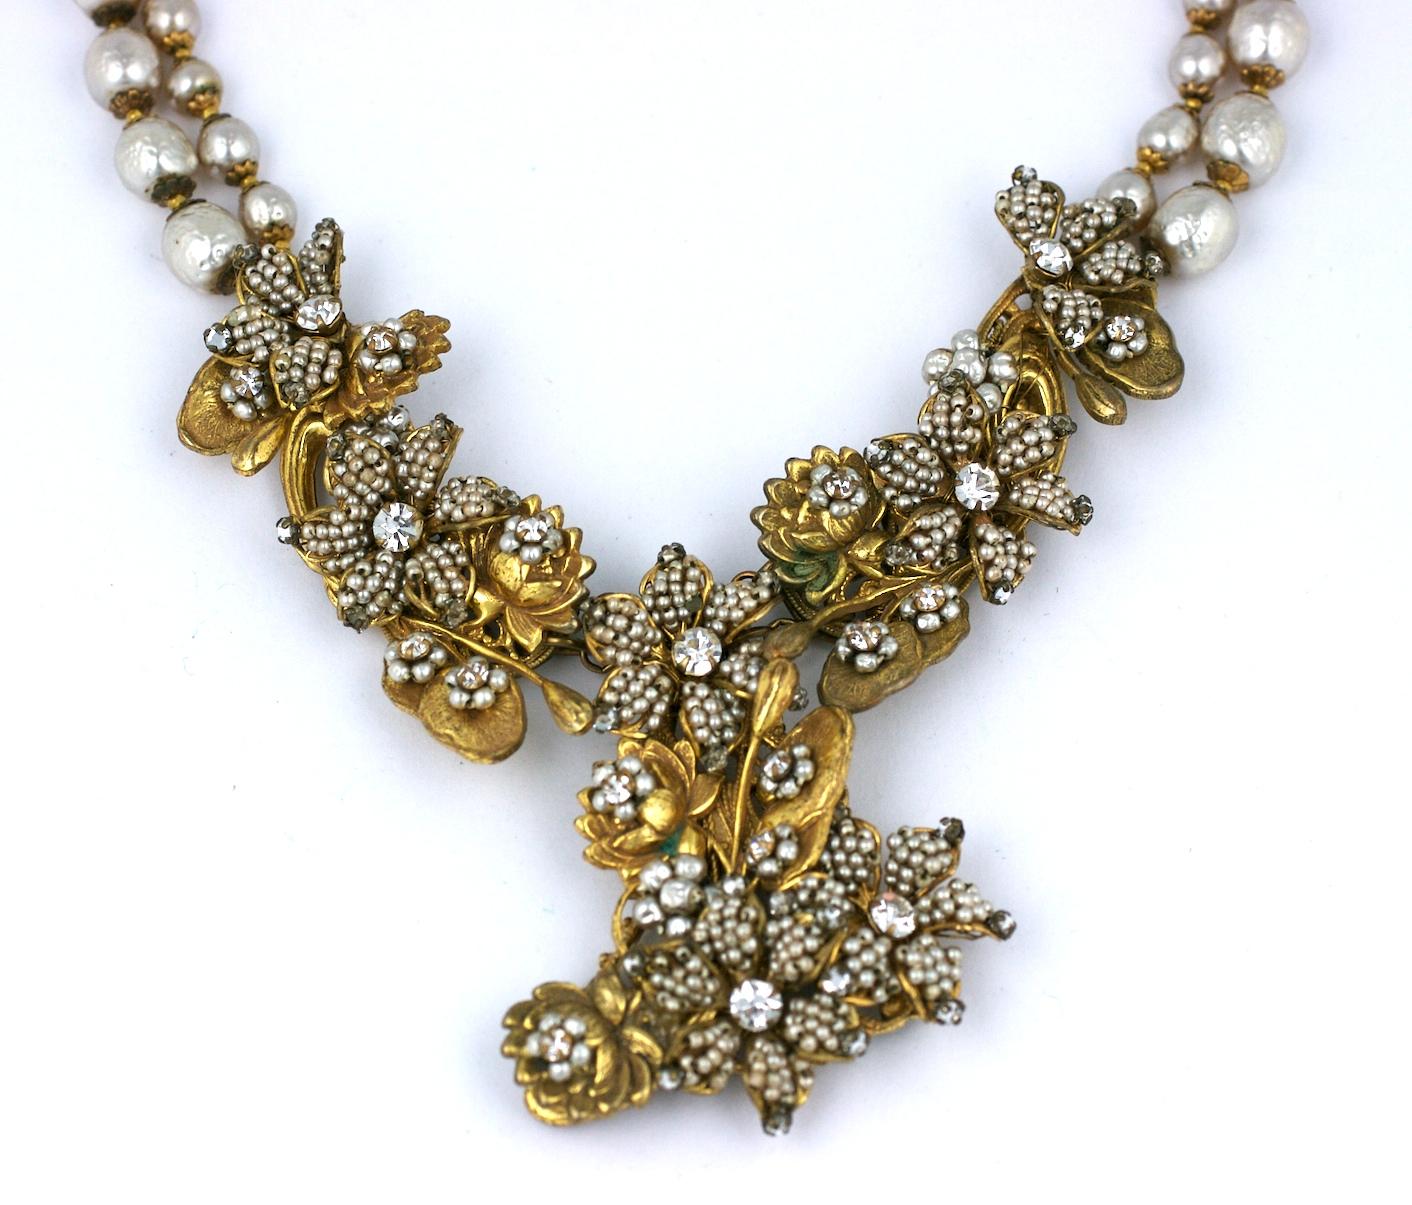 Magnificent, large Miriam Haskell necklace of signature faux pearl micro beaded flower heads set on bases of water lilies and lily pads in Haskell's signature Russian gilt metal. Early necklace with elaborate craftsmanship from the 1930's. The links